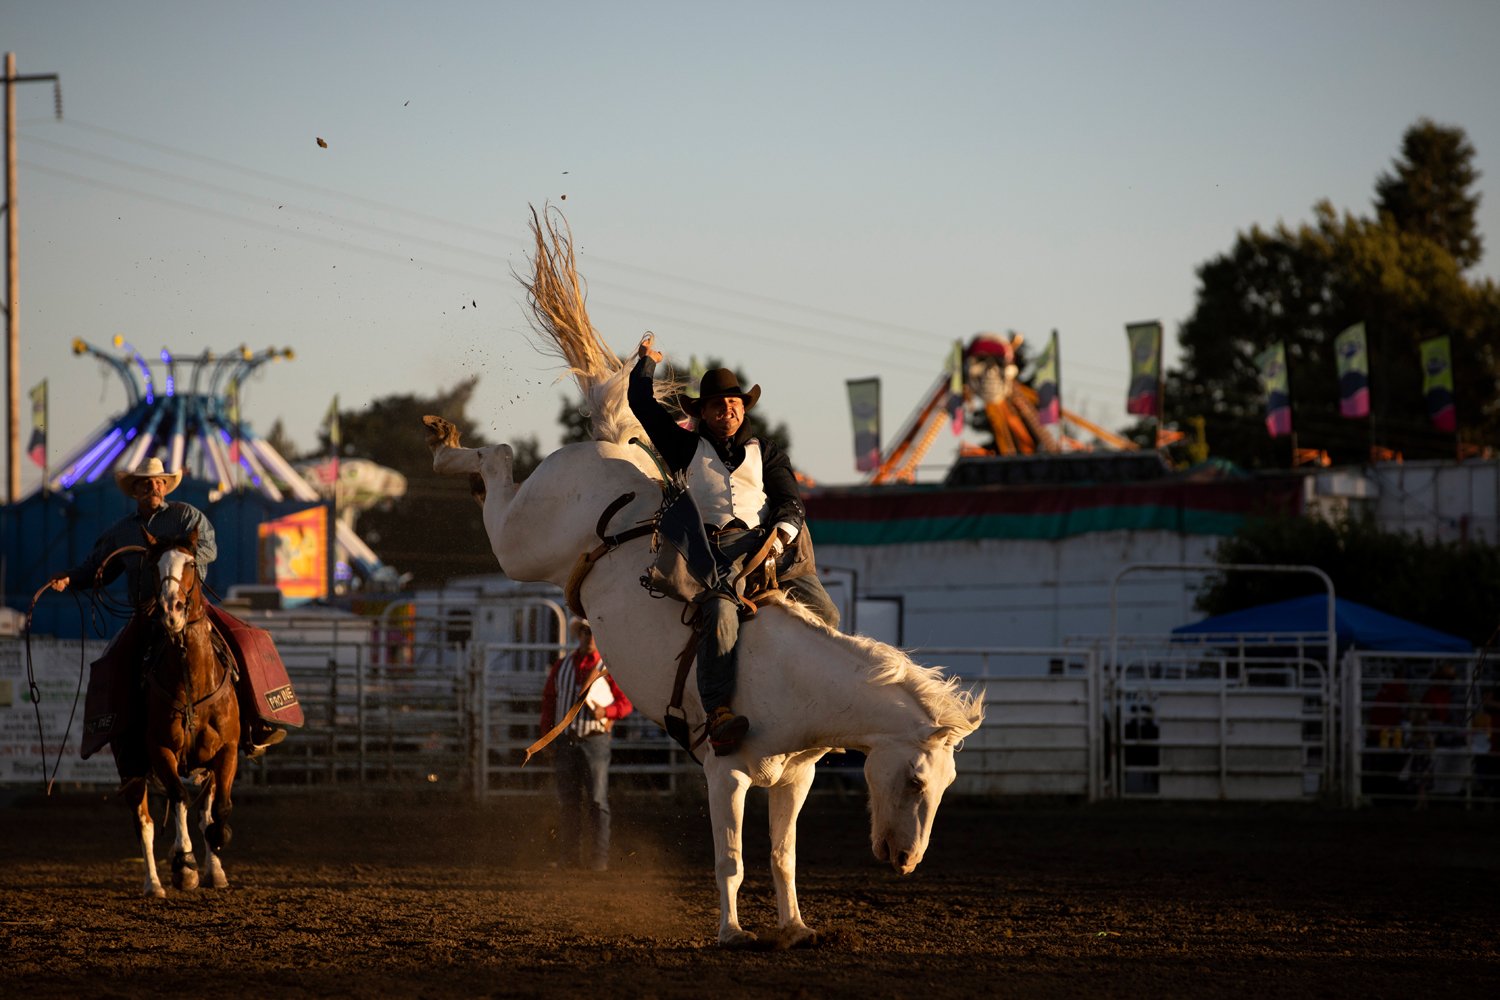  Hunter Greenup, of Lexington, Ore, competes in the bareback bronco riding event Saturday during the Columbia County Fair and Rodeo in St Helens, Ore. He participated in the events overseen by the Northwest Pro Rodeo Association, the largest regional